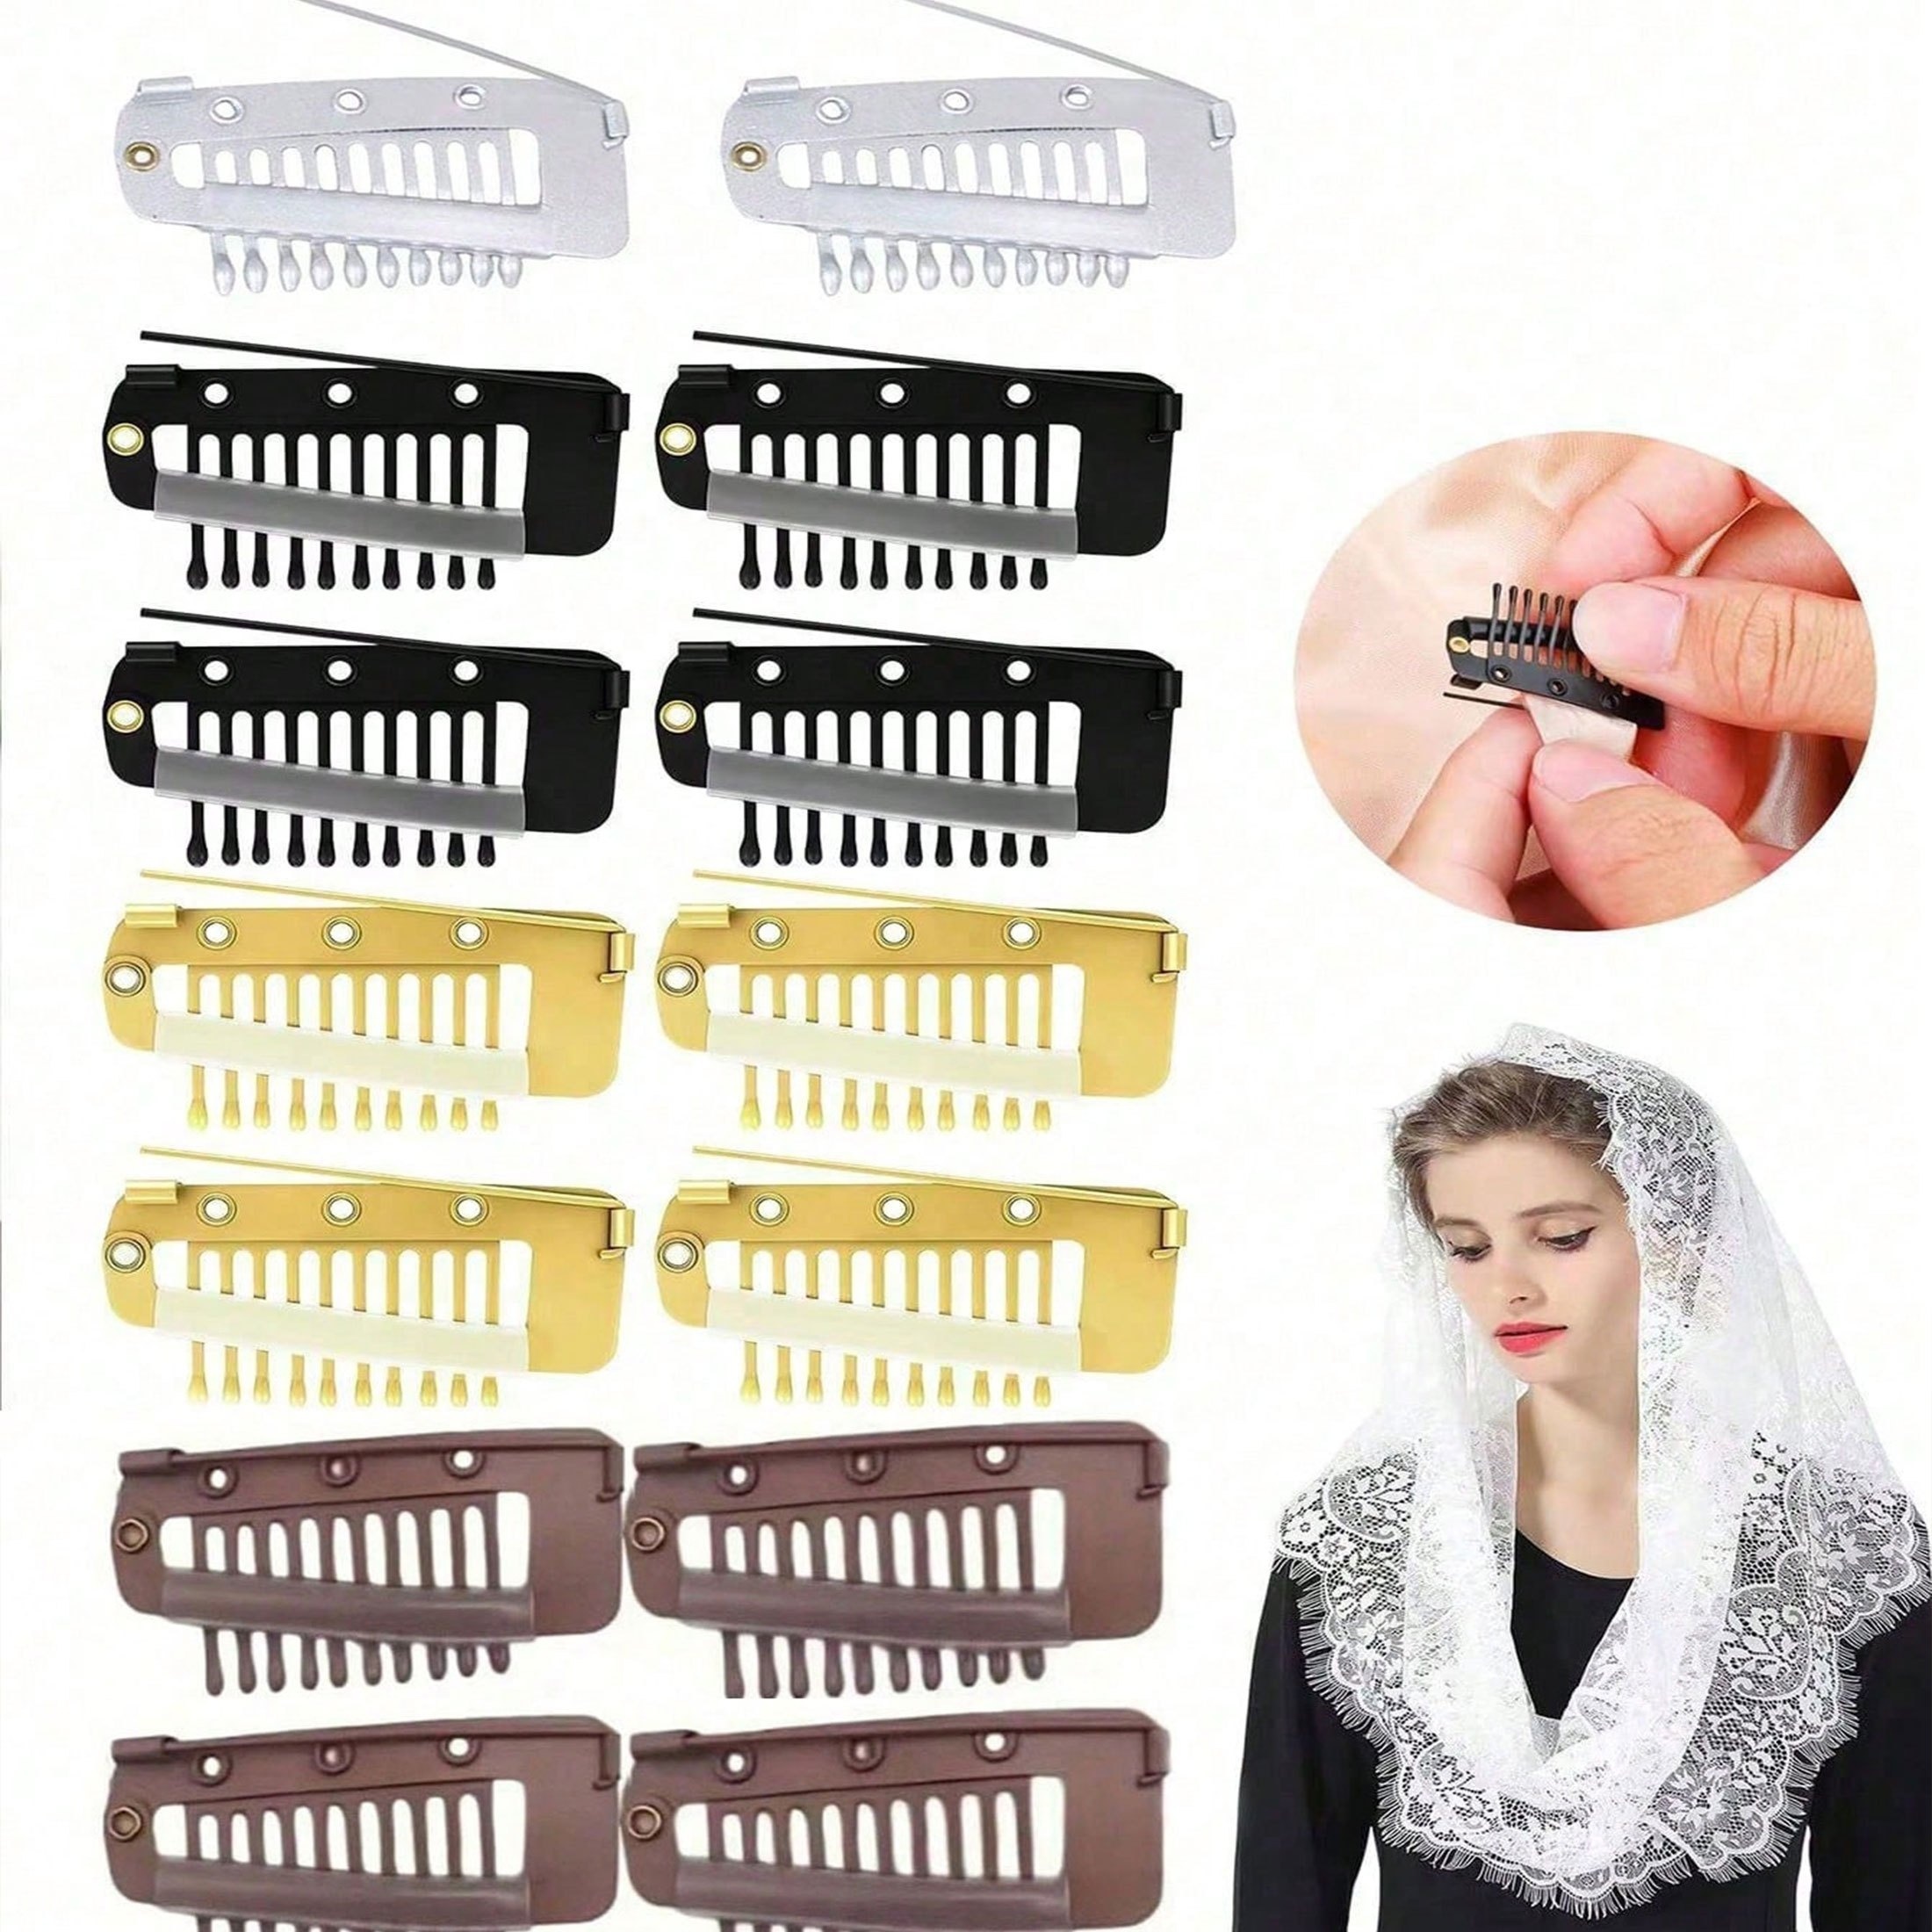 

5pcs Stainless Steel Clips, Boho Chic & Minimalist Style, Scarf & Hijab Pins, Hair Extensions Grip, Flexible Metal Bb Snap Clips For Headscarves & Hats